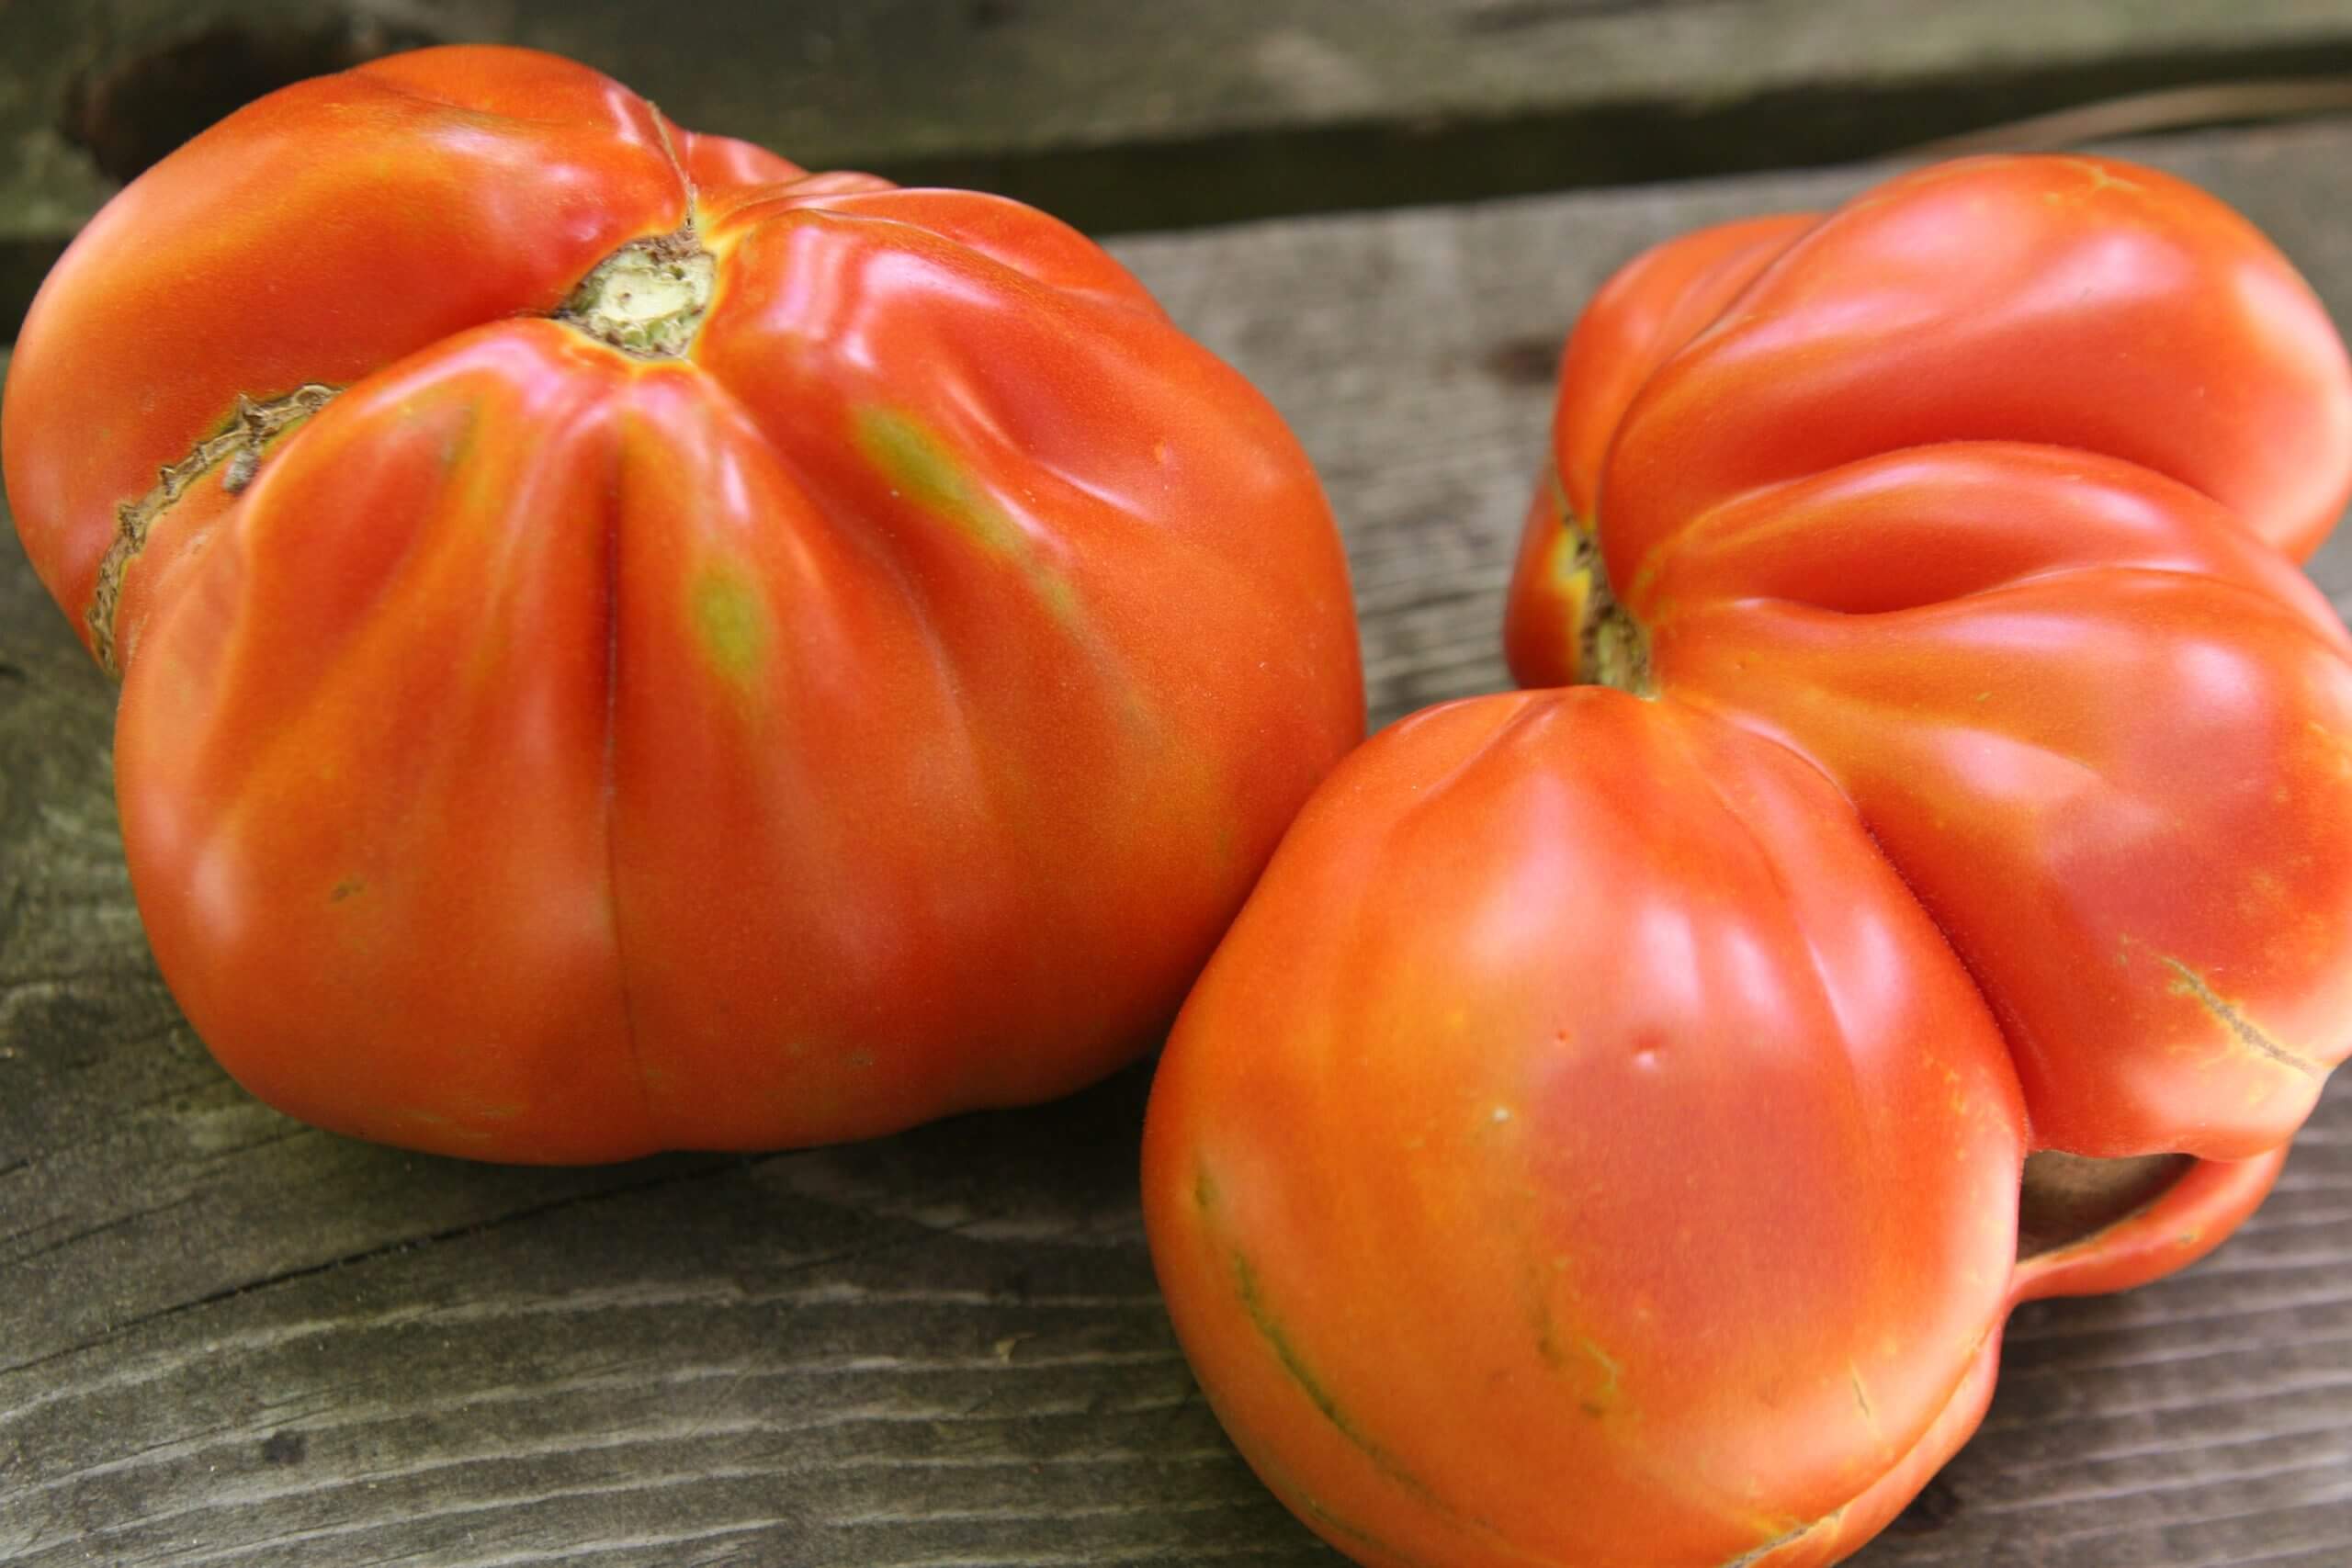 Fresh, heirloom tomatoes are also essential for really good salsa, fresh or cooked.